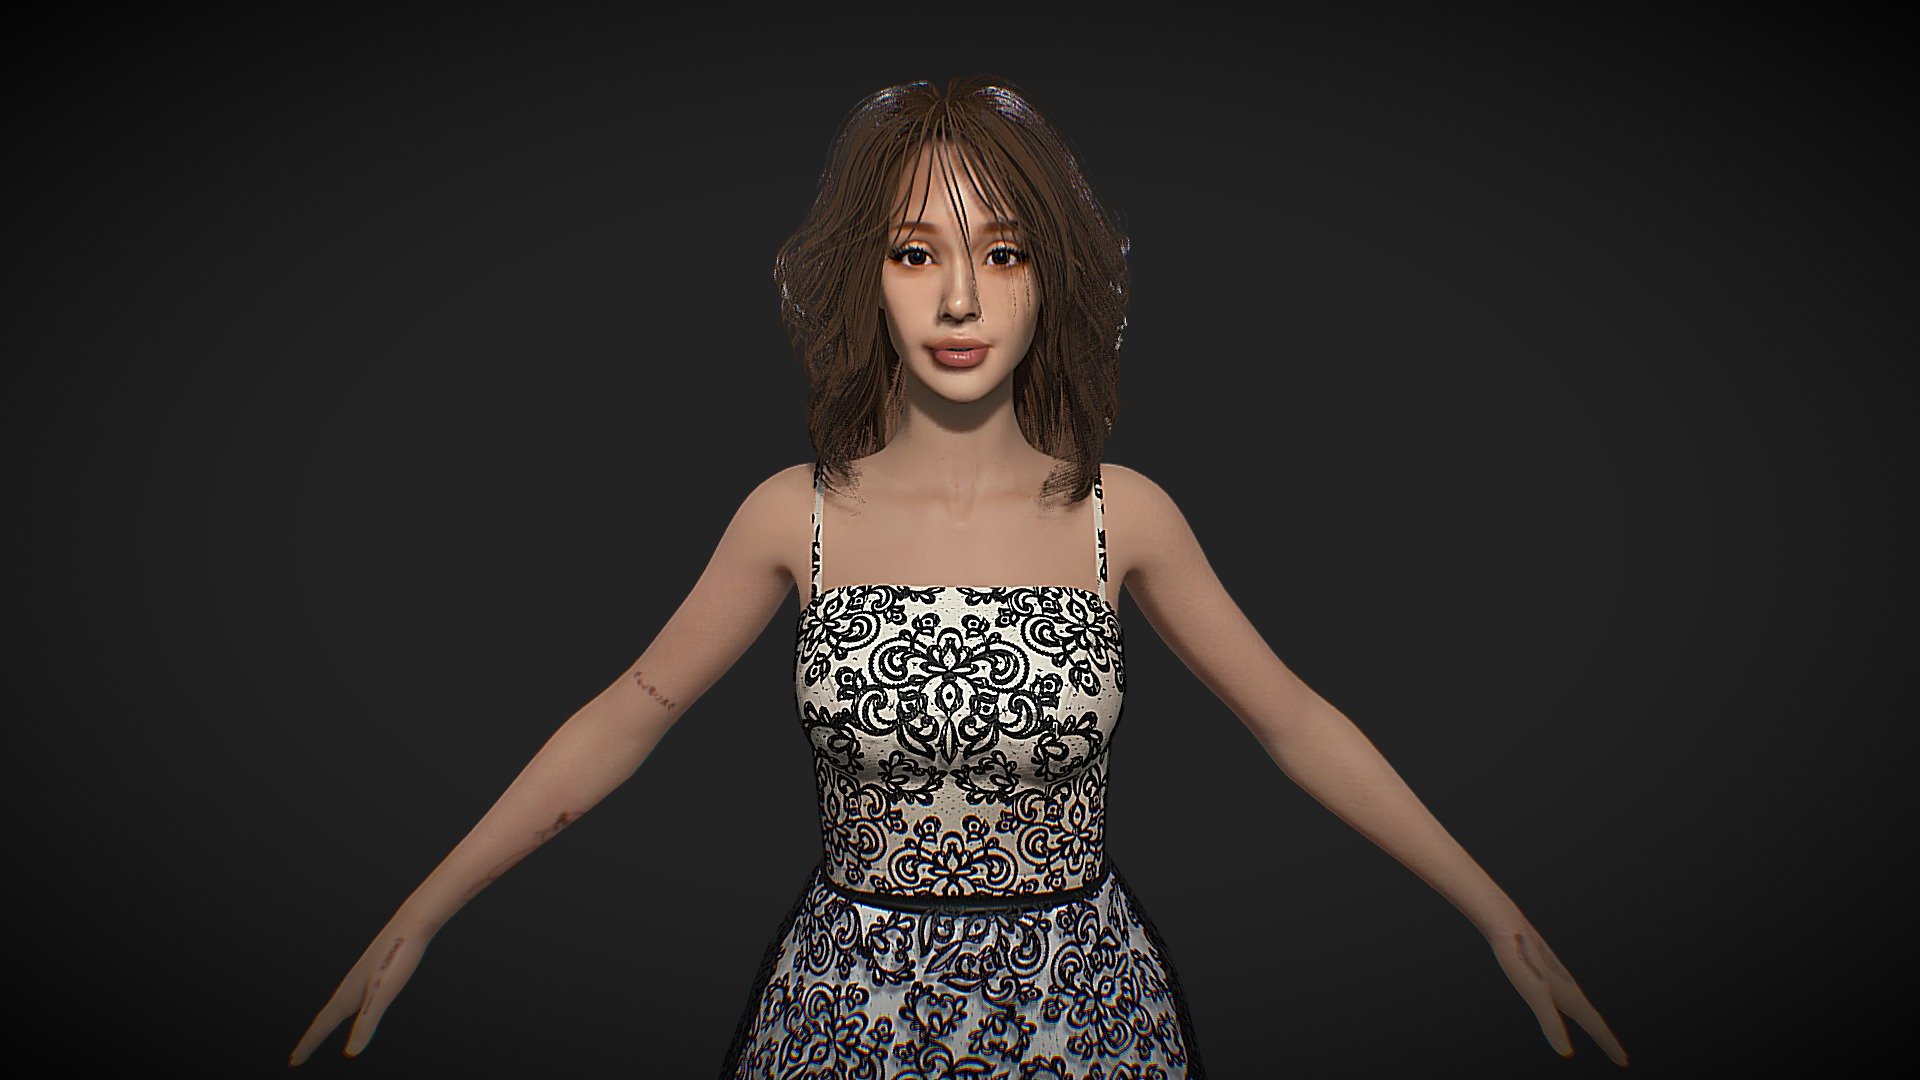 This is a new Ariana Grande model I did on blender with and alternative look.
I used Blender to create the model, hair and dress, and potoshop to create the textures.
This model is not rigged 3d model